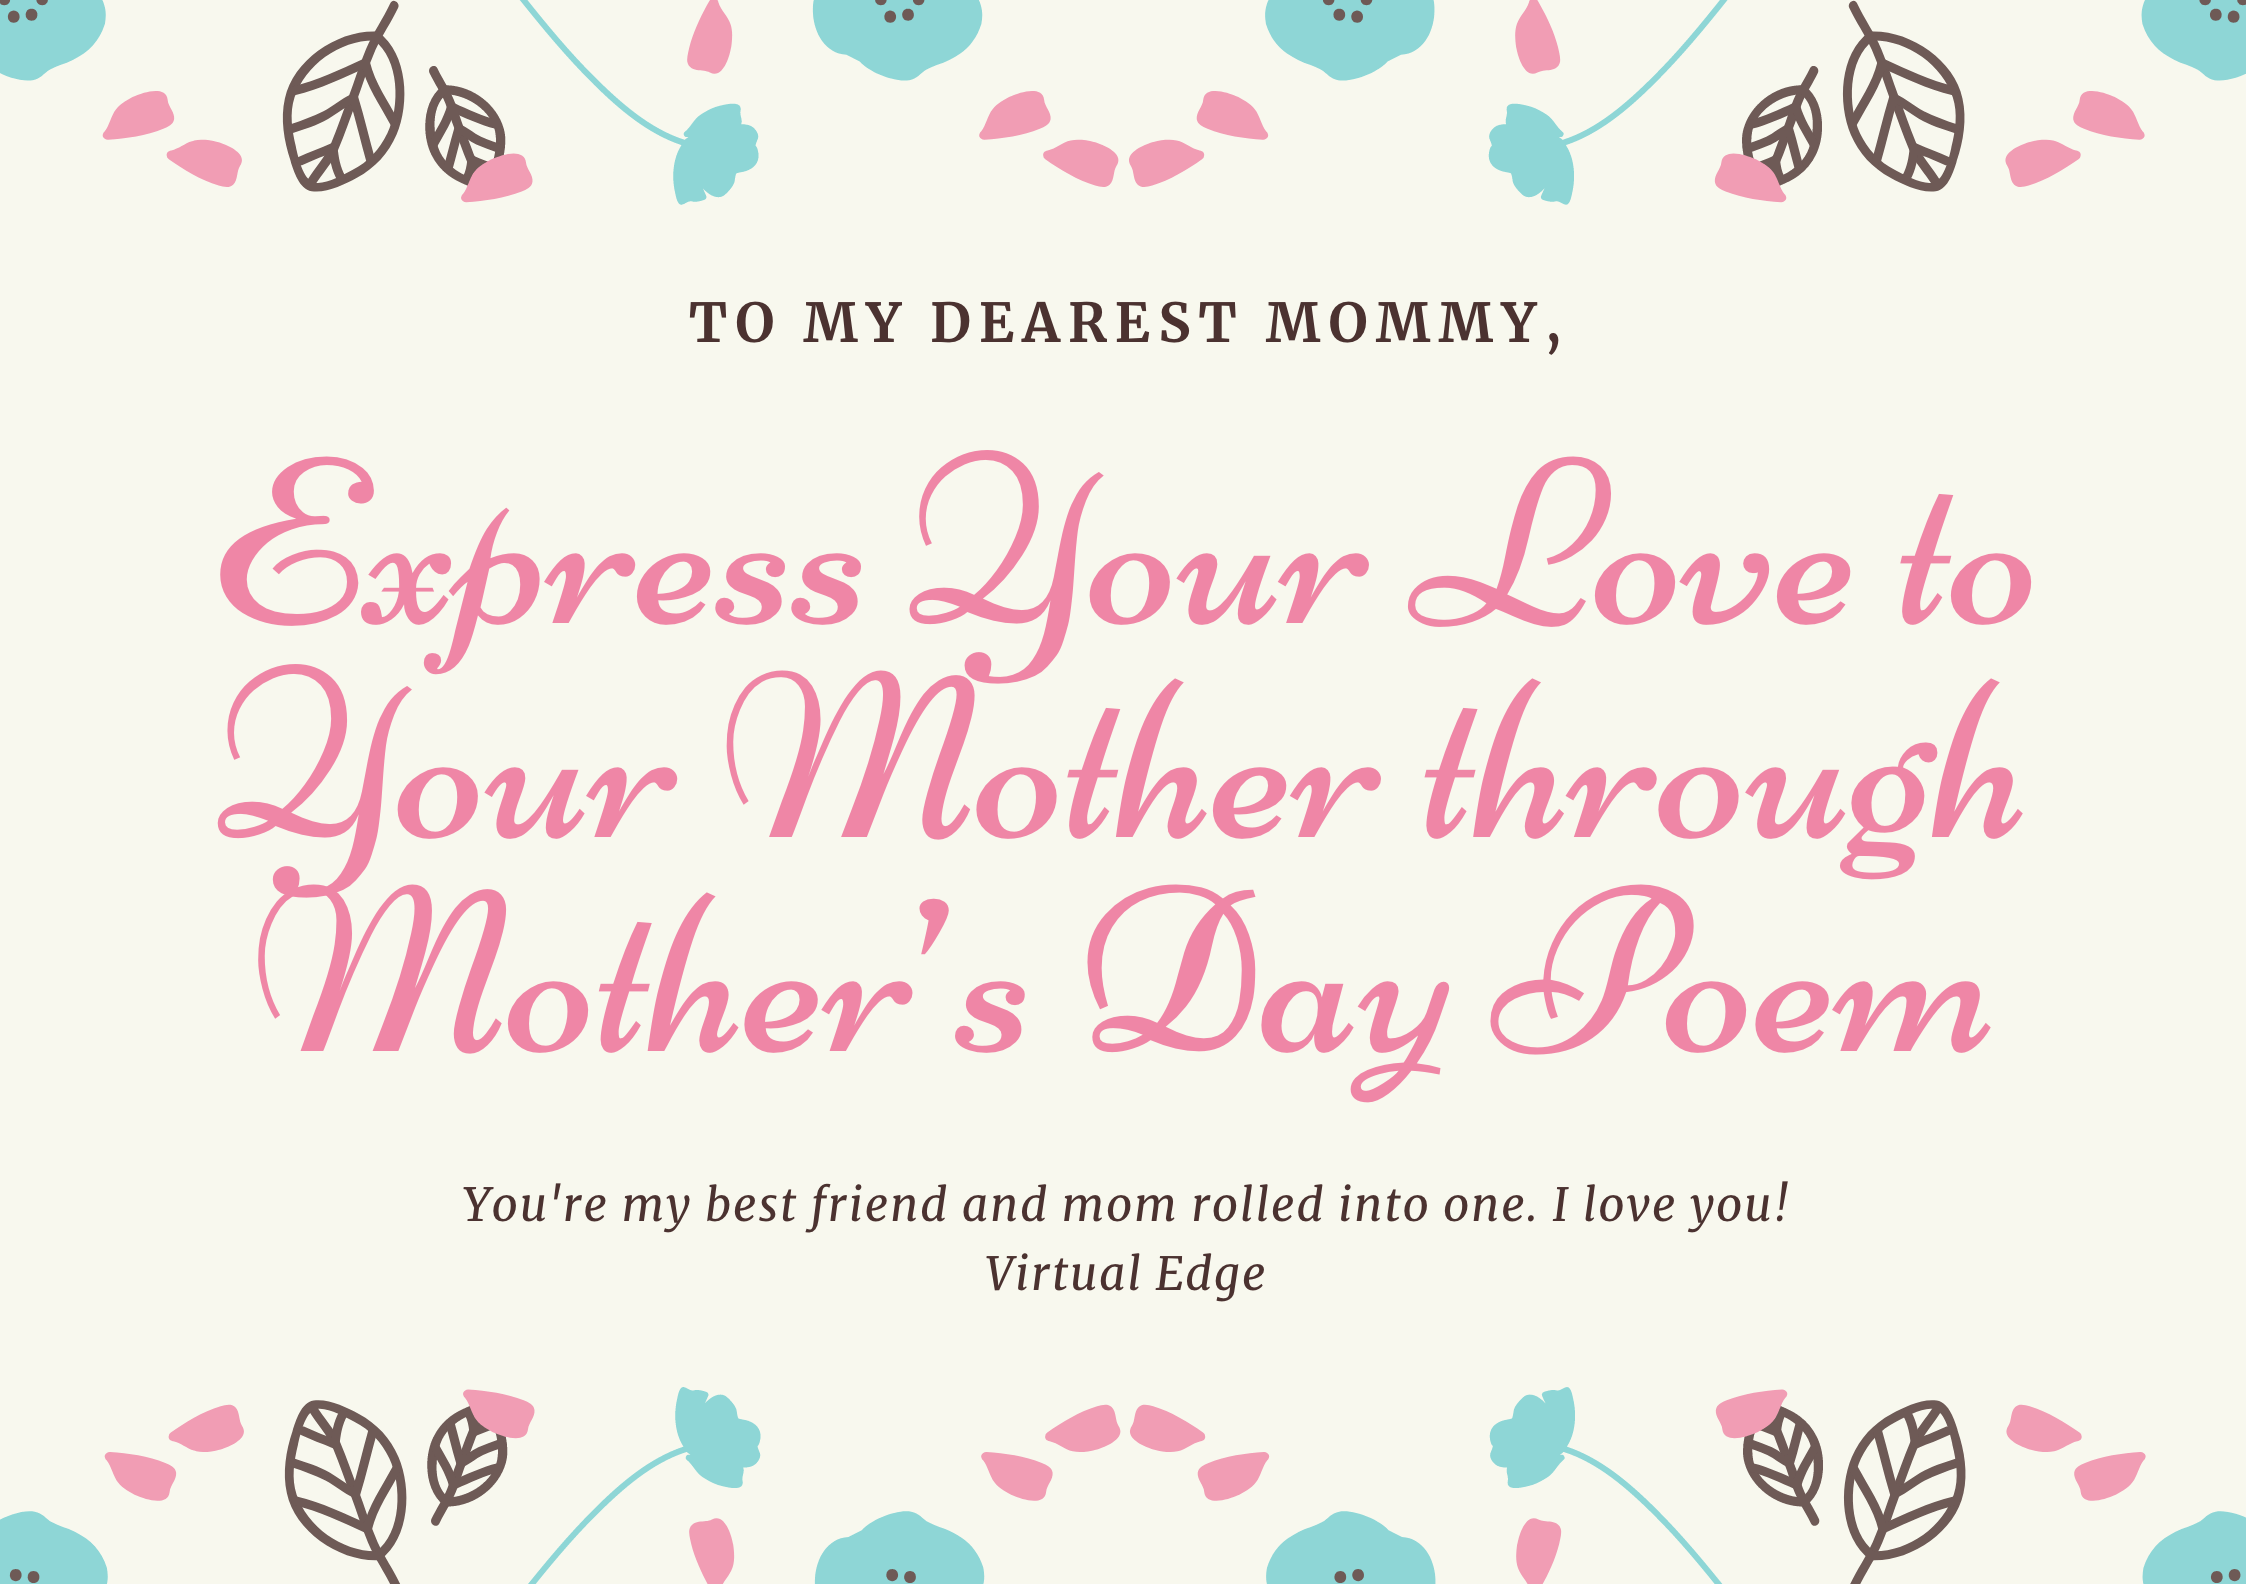 Express Your Love to Your Mother through Mother’s Day Poem